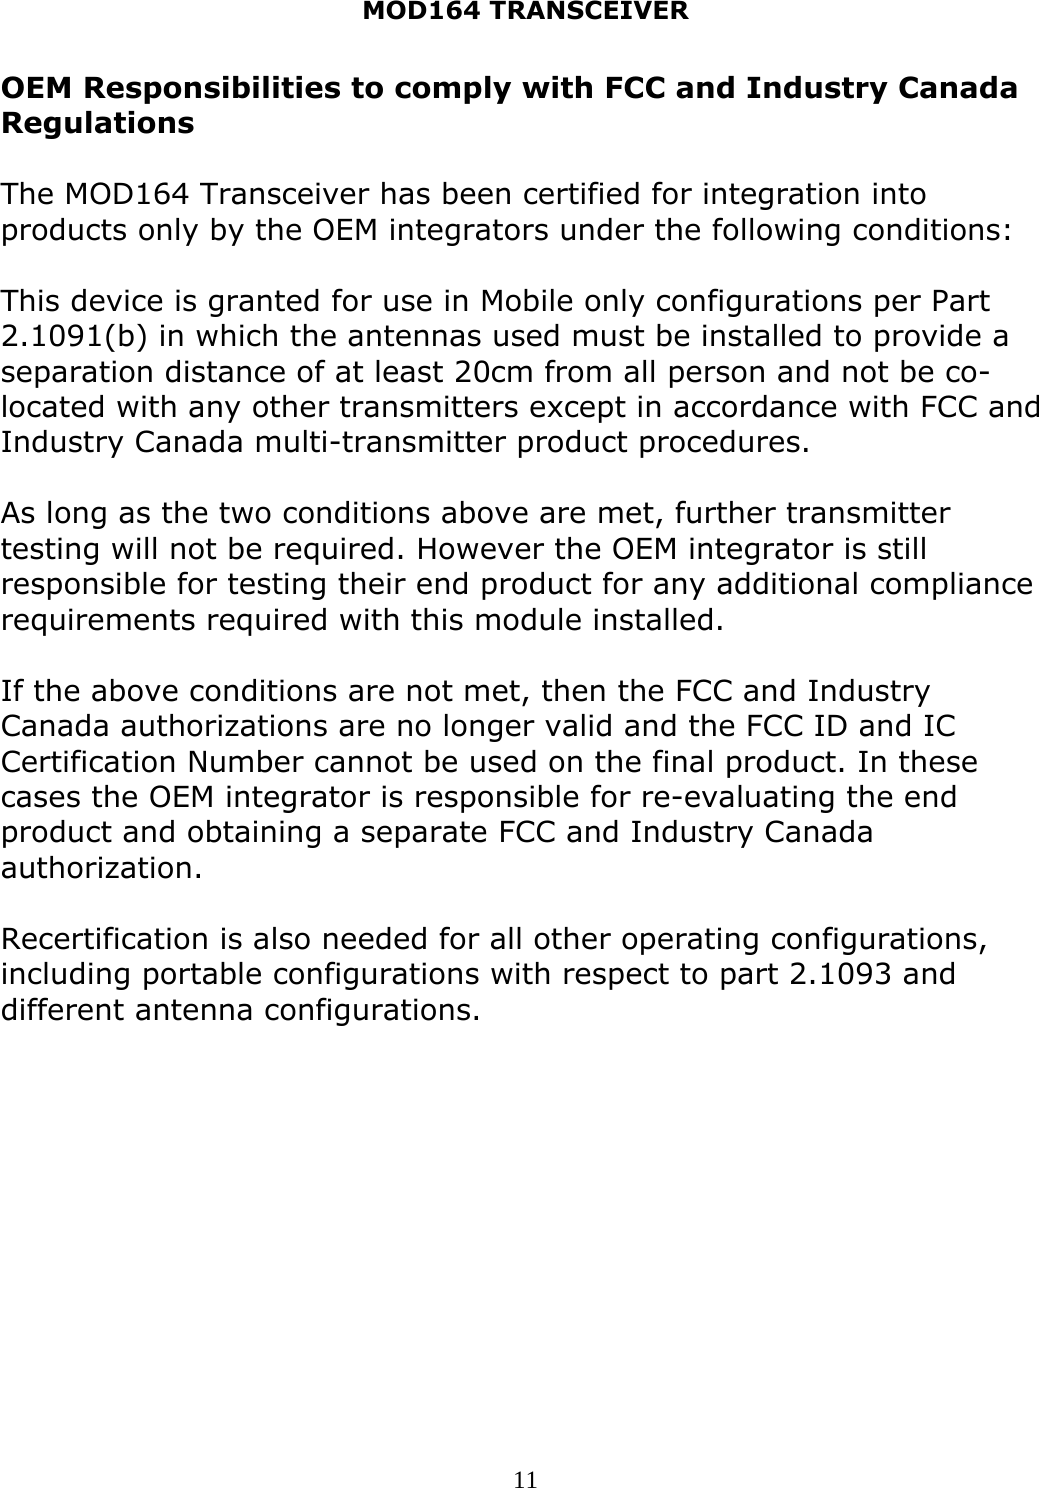 MOD164 TRANSCEIVER  11OEM Responsibilities to comply with FCC and Industry Canada Regulations  The MOD164 Transceiver has been certified for integration into products only by the OEM integrators under the following conditions:  This device is granted for use in Mobile only configurations per Part 2.1091(b) in which the antennas used must be installed to provide a separation distance of at least 20cm from all person and not be co-located with any other transmitters except in accordance with FCC and Industry Canada multi-transmitter product procedures.  As long as the two conditions above are met, further transmitter testing will not be required. However the OEM integrator is still responsible for testing their end product for any additional compliance requirements required with this module installed.  If the above conditions are not met, then the FCC and Industry Canada authorizations are no longer valid and the FCC ID and IC Certification Number cannot be used on the final product. In these cases the OEM integrator is responsible for re-evaluating the end product and obtaining a separate FCC and Industry Canada authorization.  Recertification is also needed for all other operating configurations, including portable configurations with respect to part 2.1093 and different antenna configurations. 